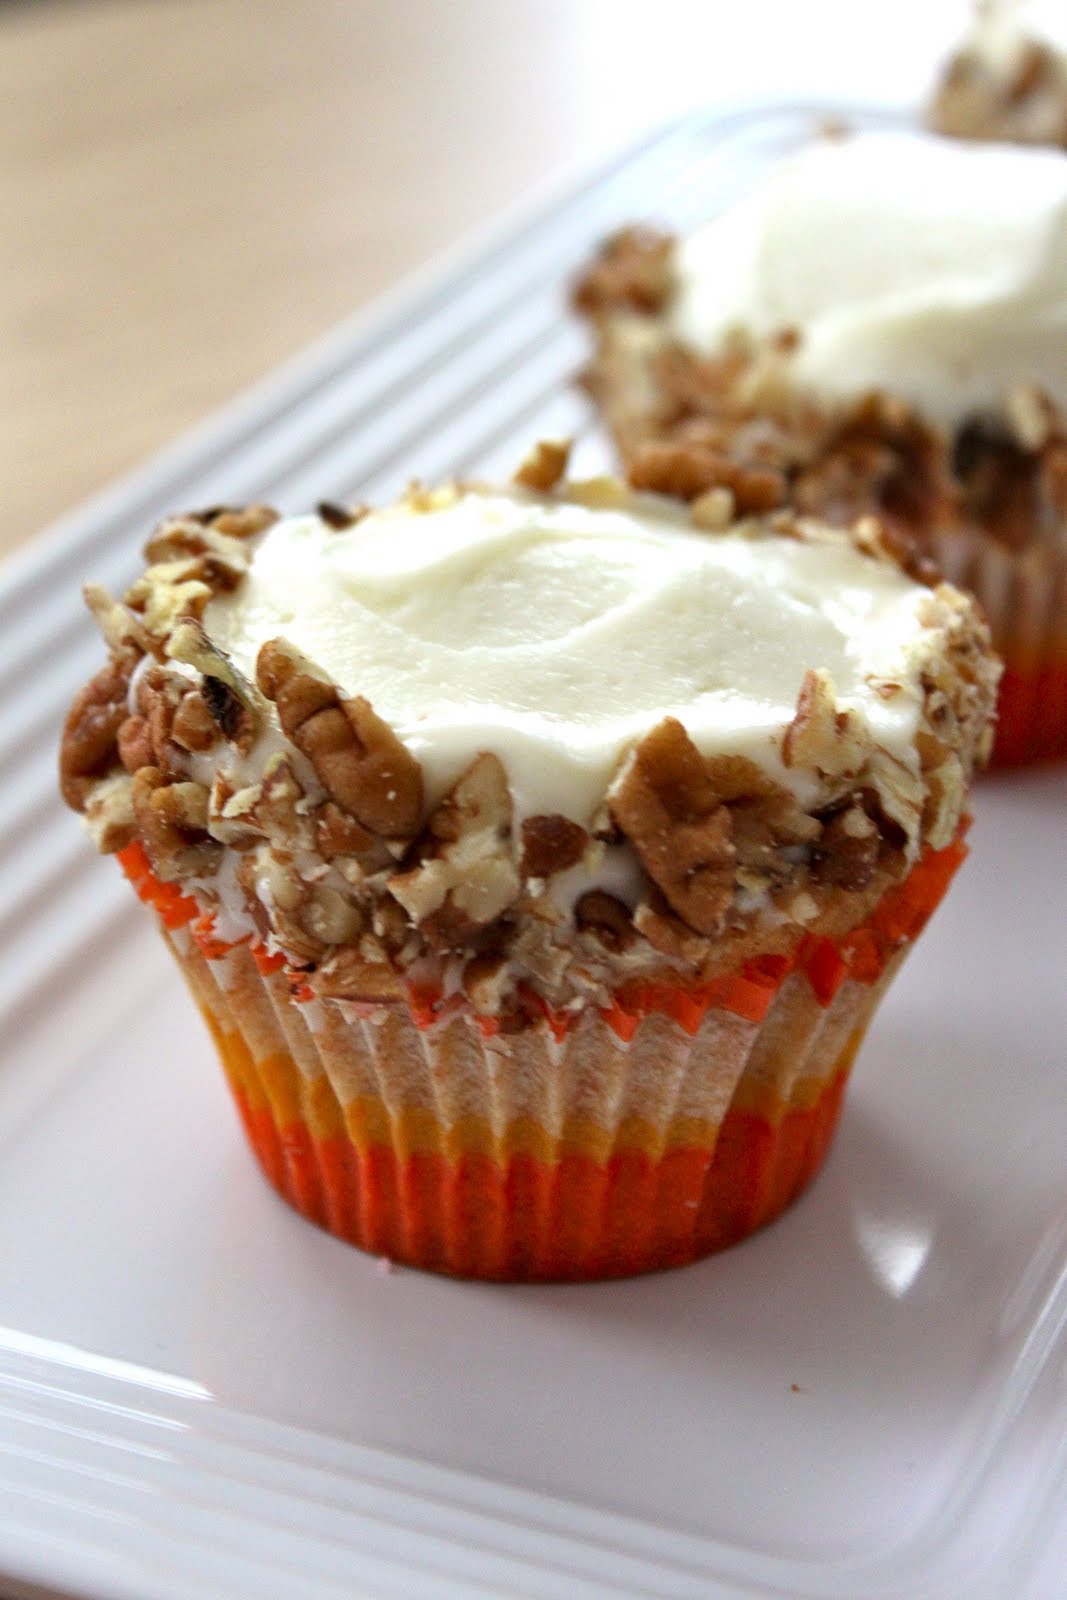 Baked Perfection: Carrot Cupcakes with Cream Cheese Frosting